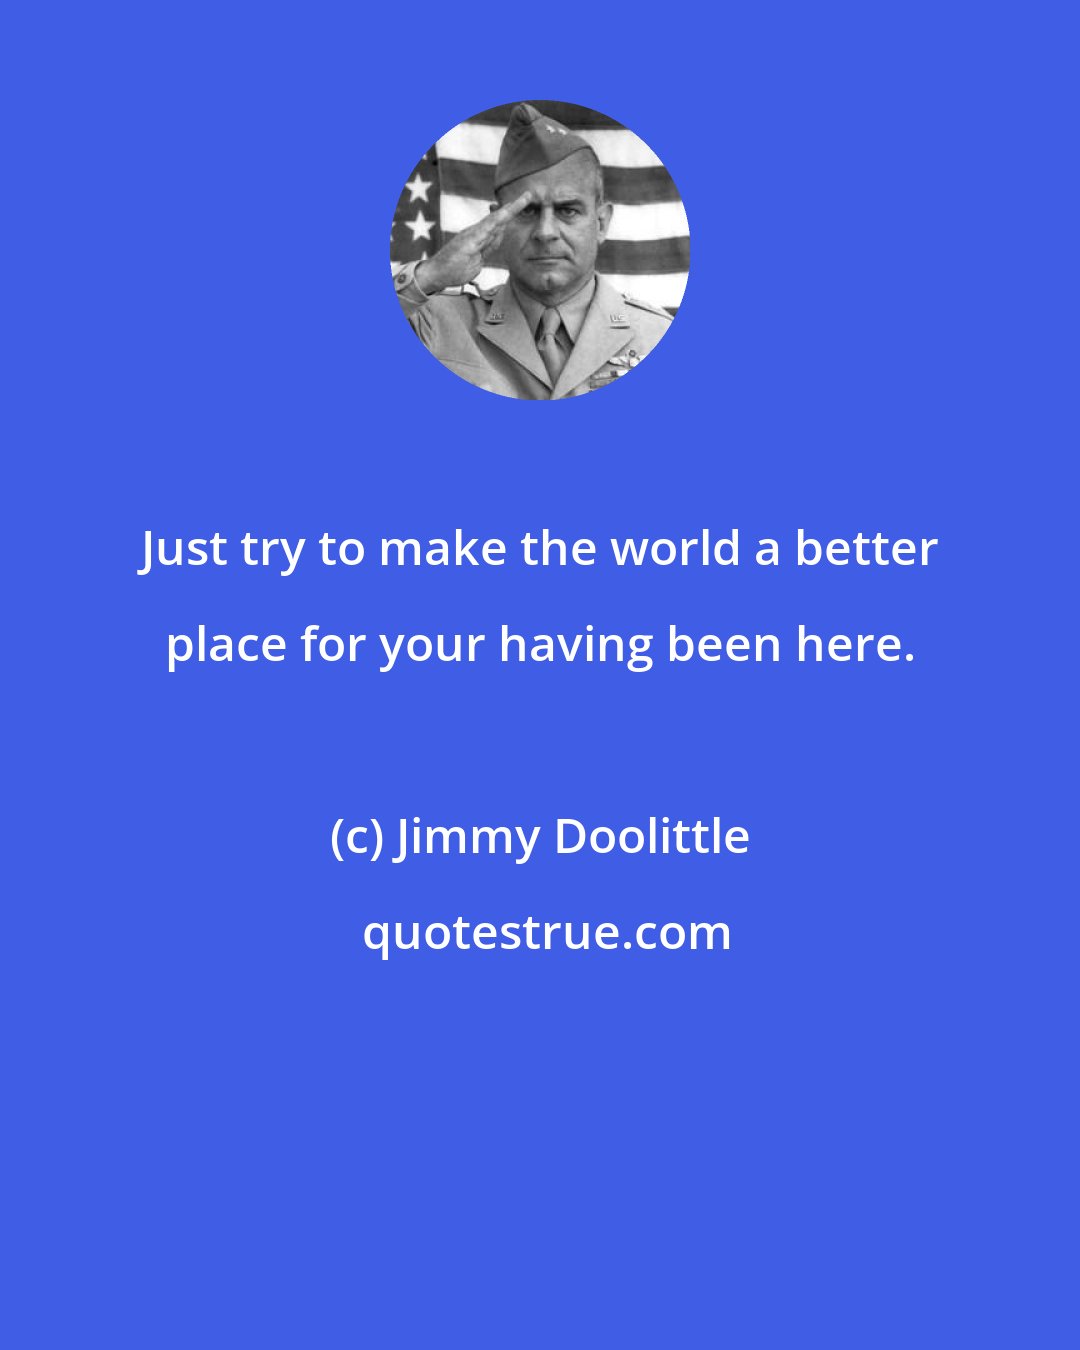 Jimmy Doolittle: Just try to make the world a better place for your having been here.